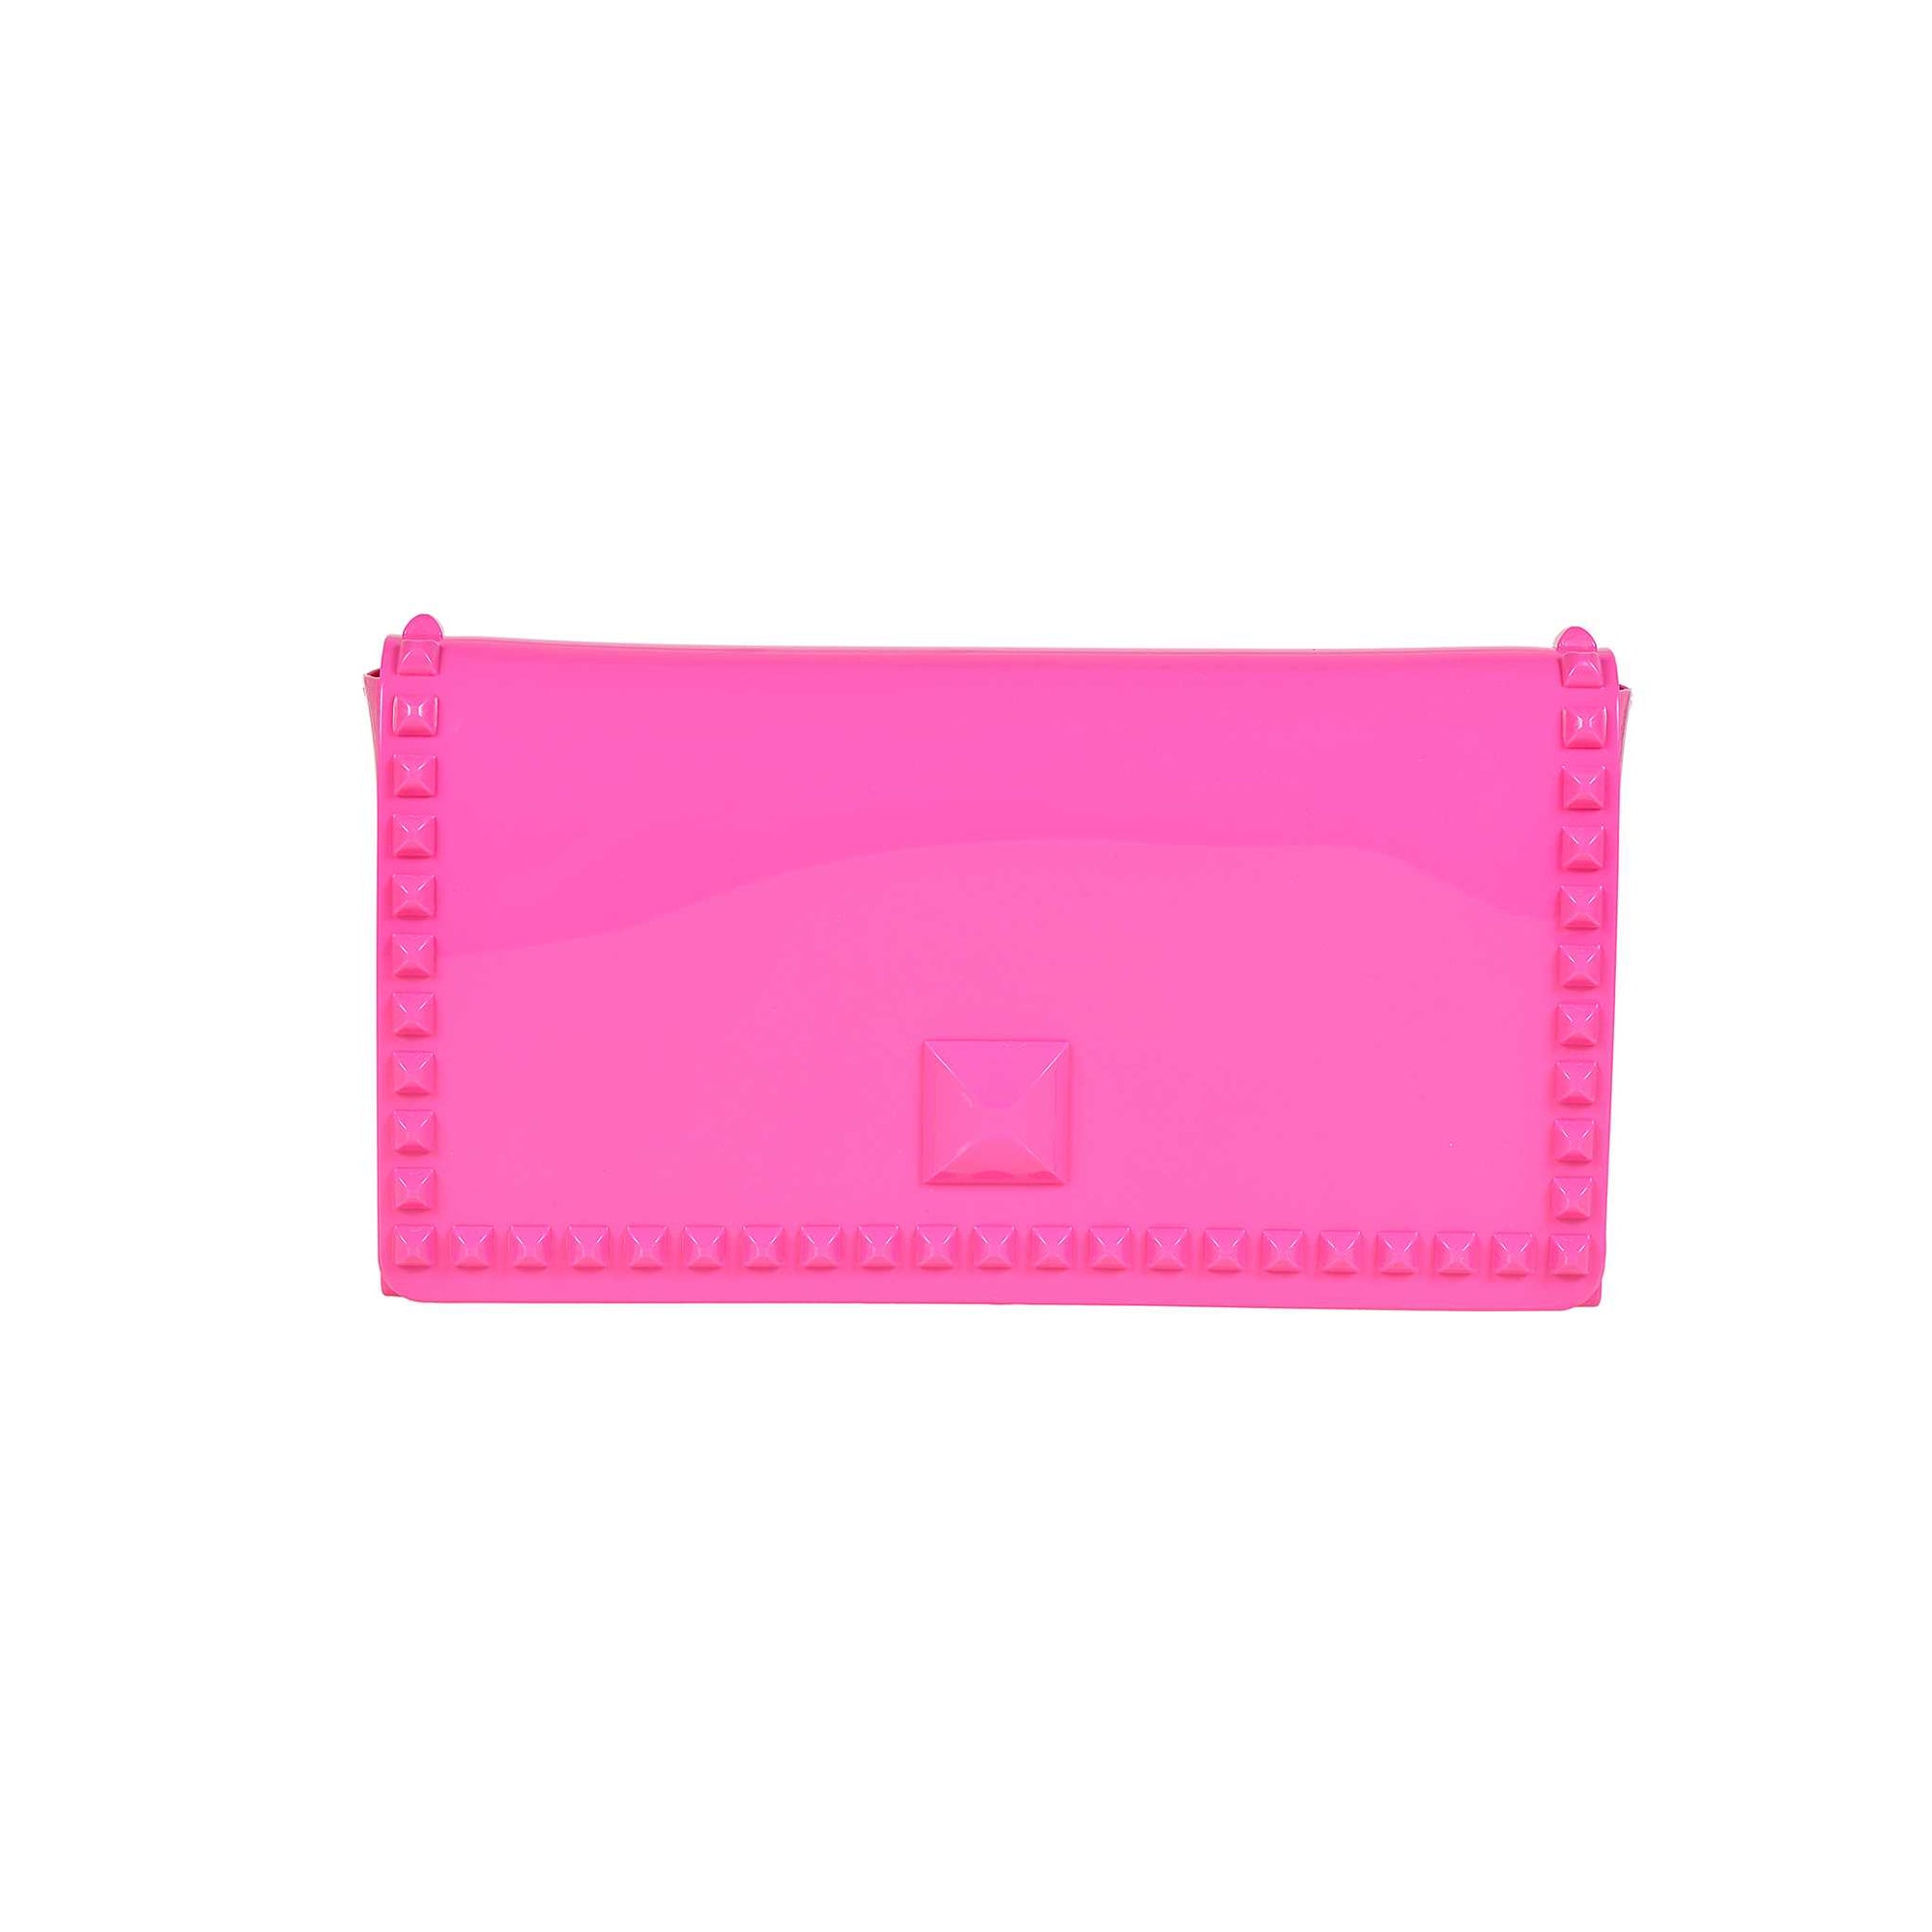 Made in Italy studded purse in color fuchsia